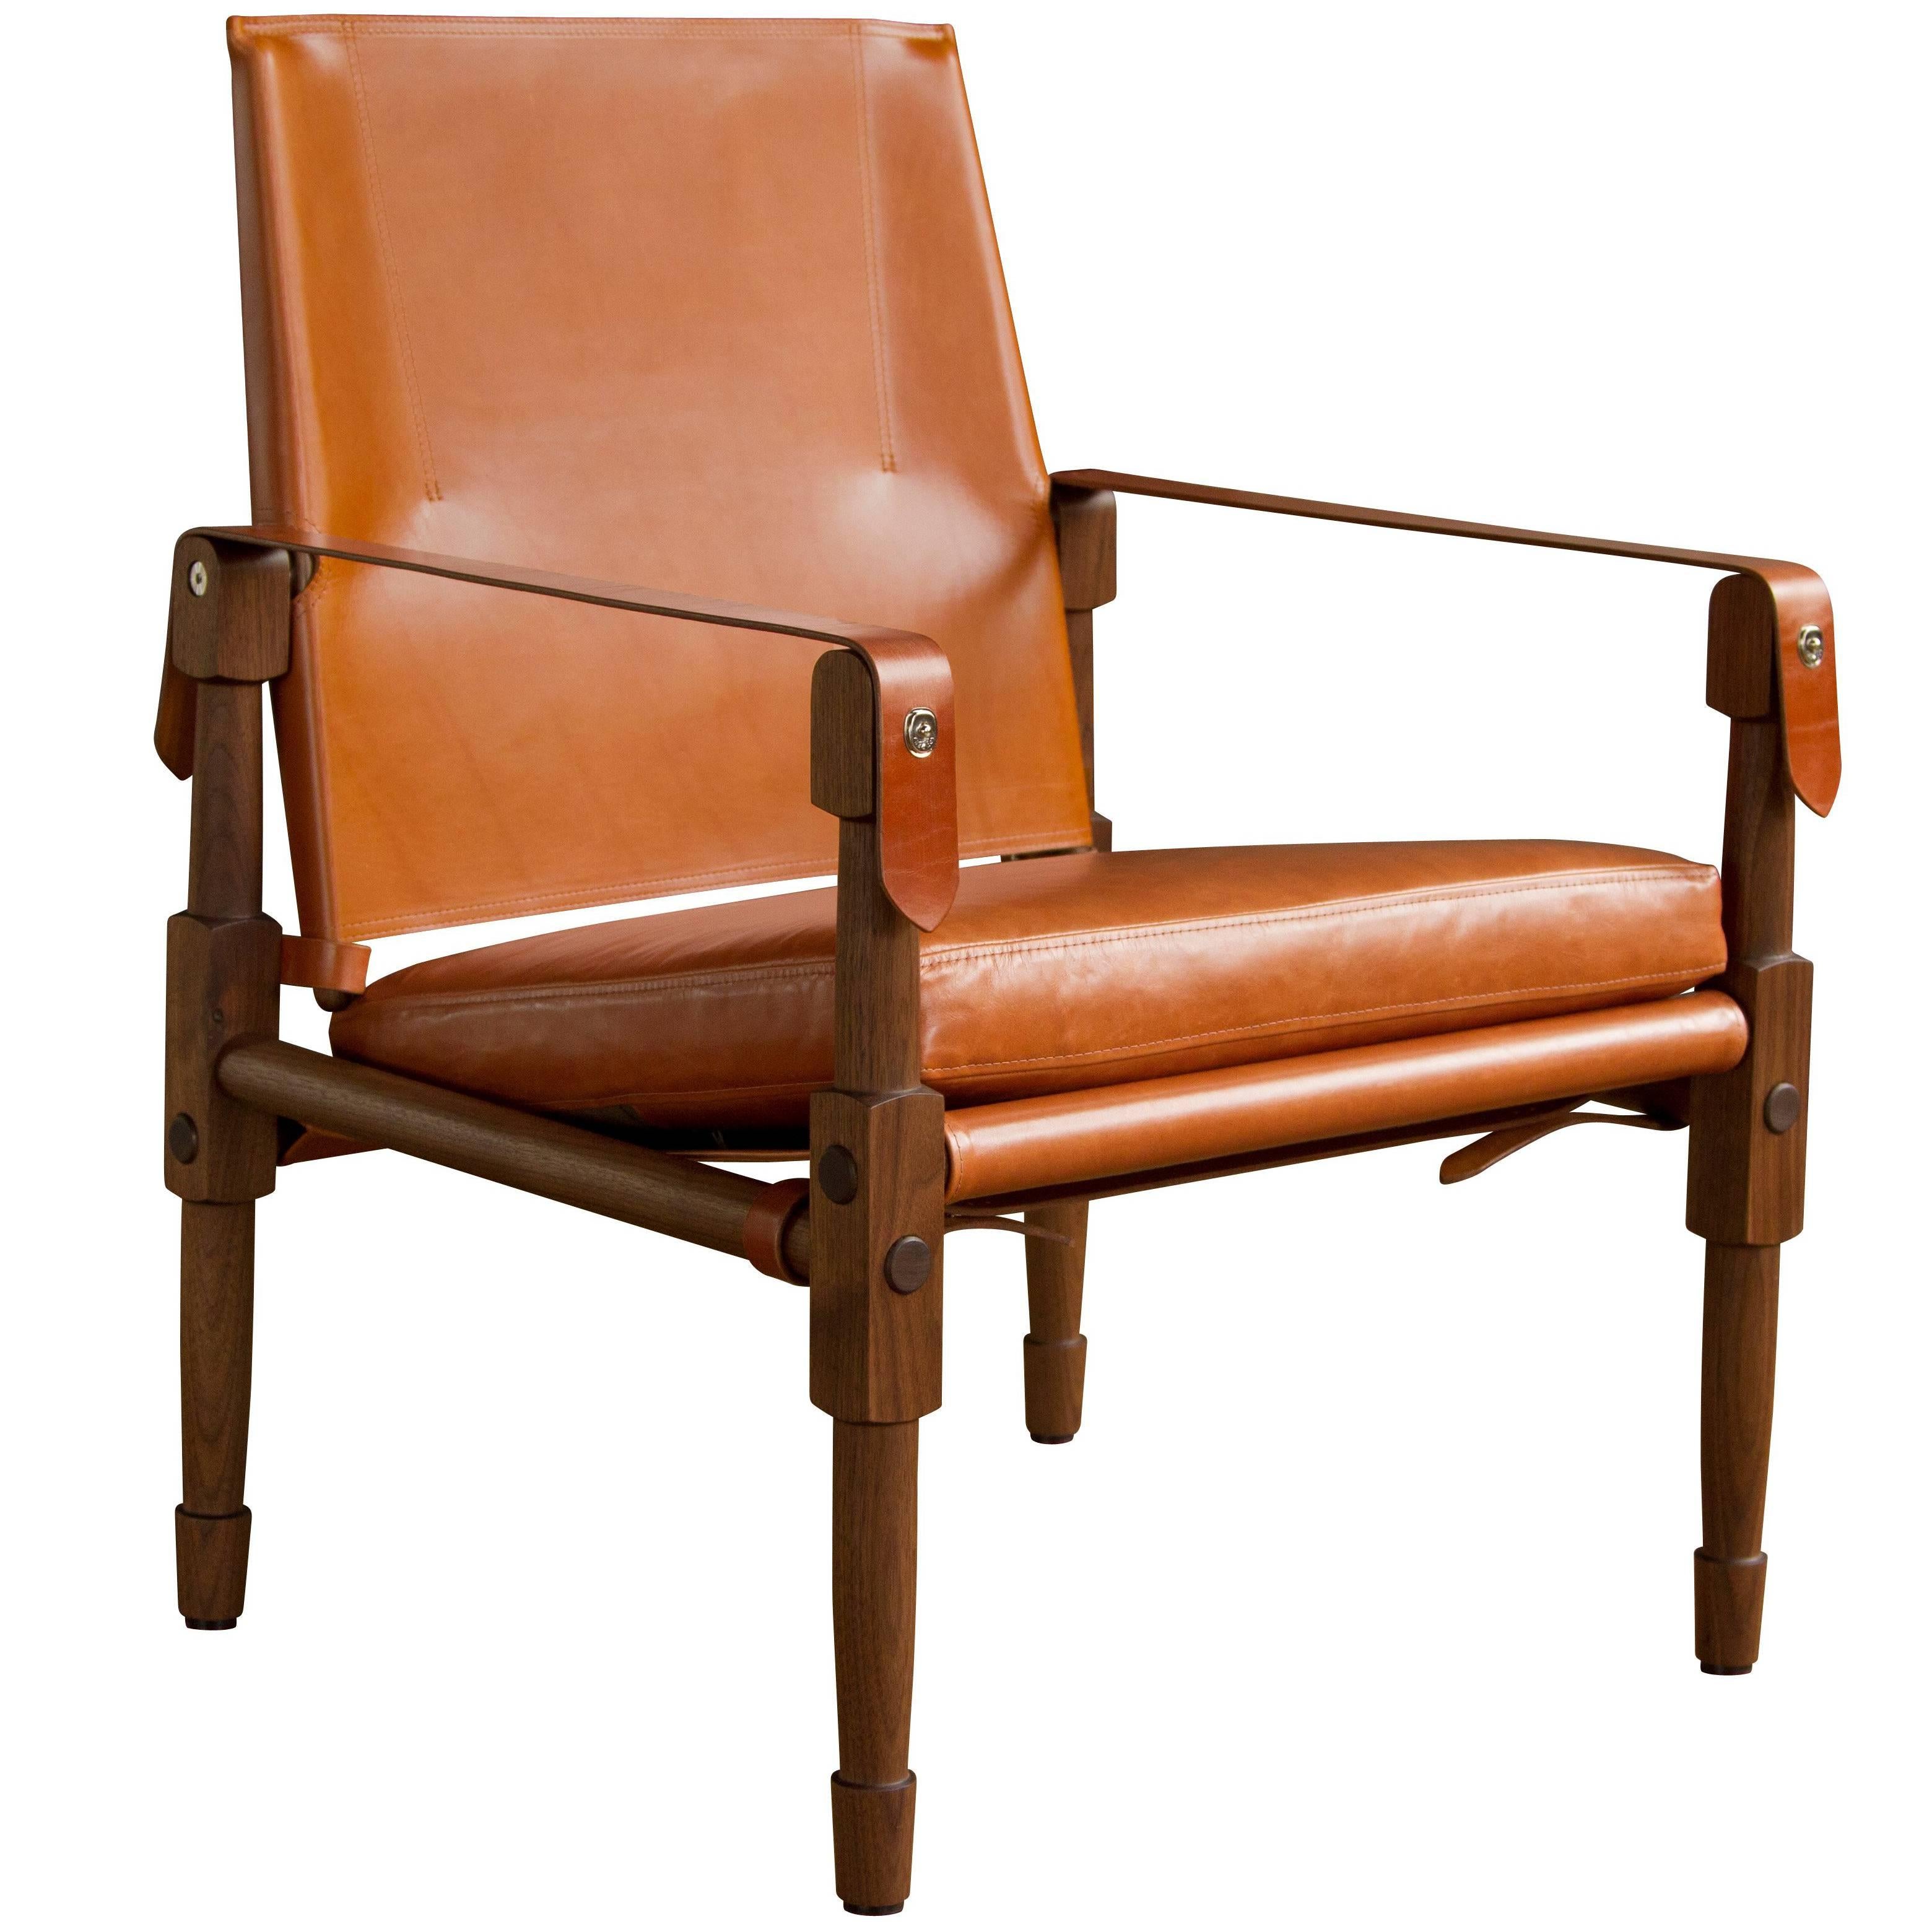 Grand Chatwin Lounge Chair - handcrafted by Richard Wrightman Design